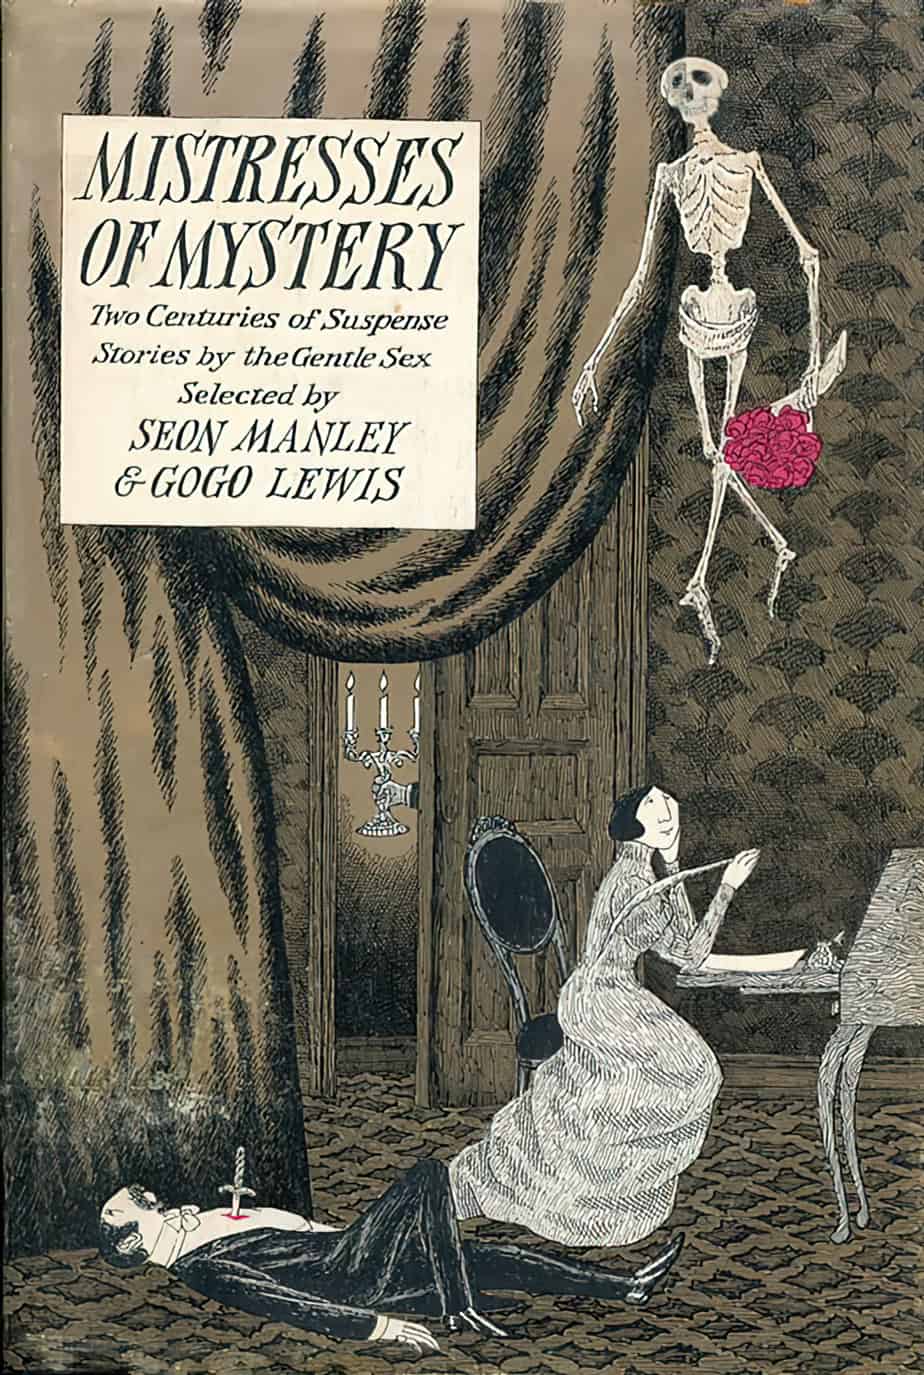 Edward Gorey (American,1925-2000) - Cover illustration for "Mistresses Of Mystery- Two Centuries Of Suspense Stories By The Gentle Sex".